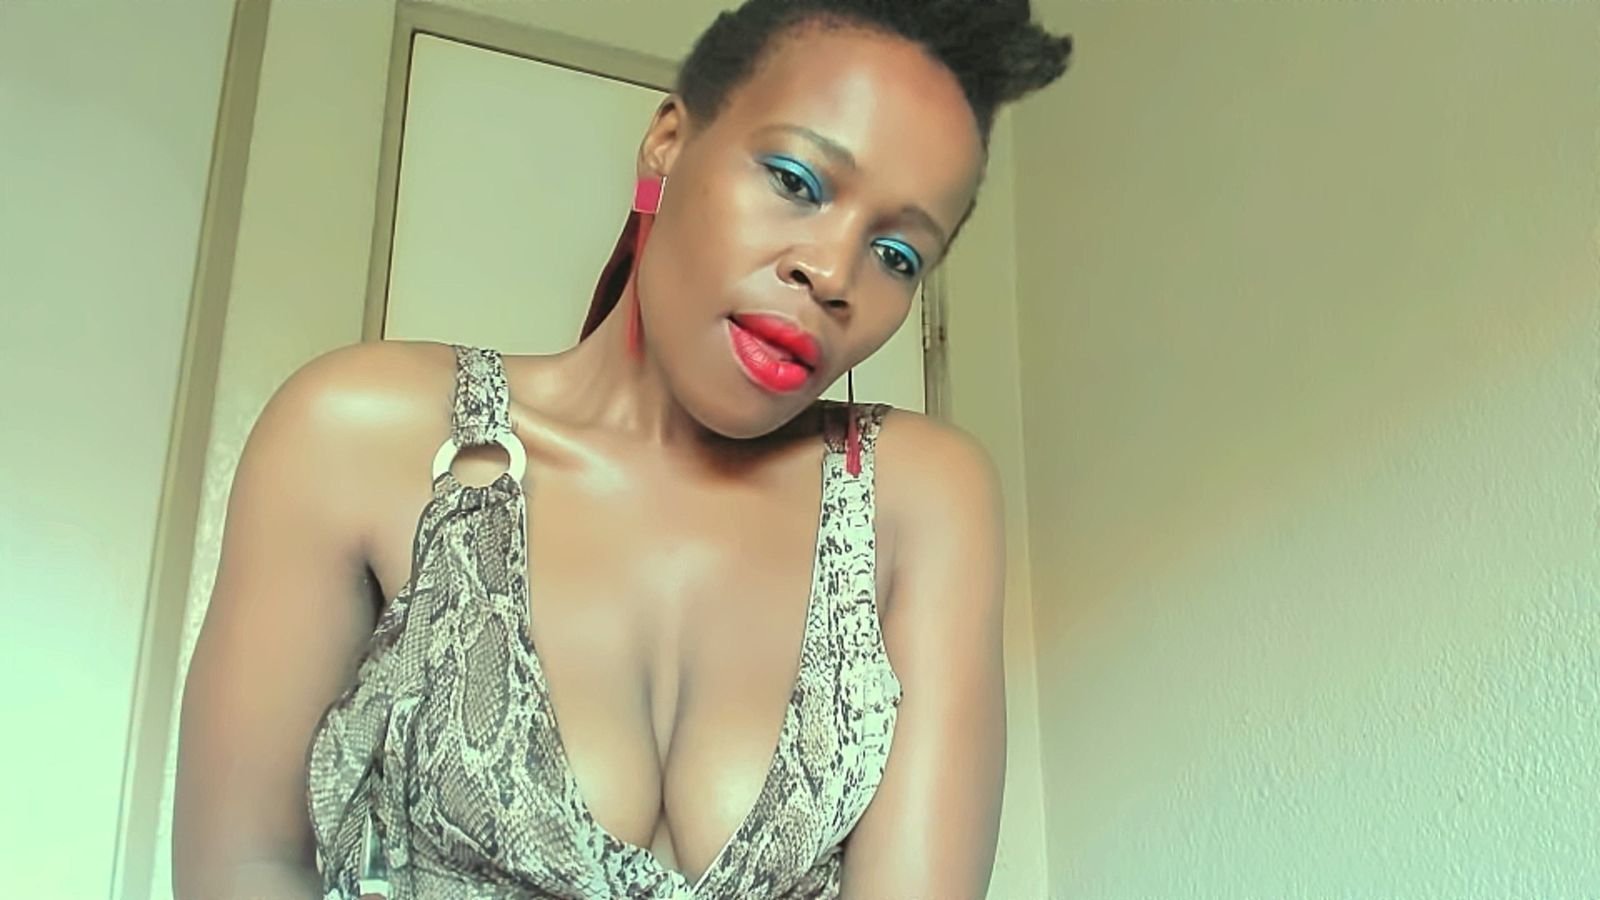 Skype live sex chat with AfricanSquirtQueen